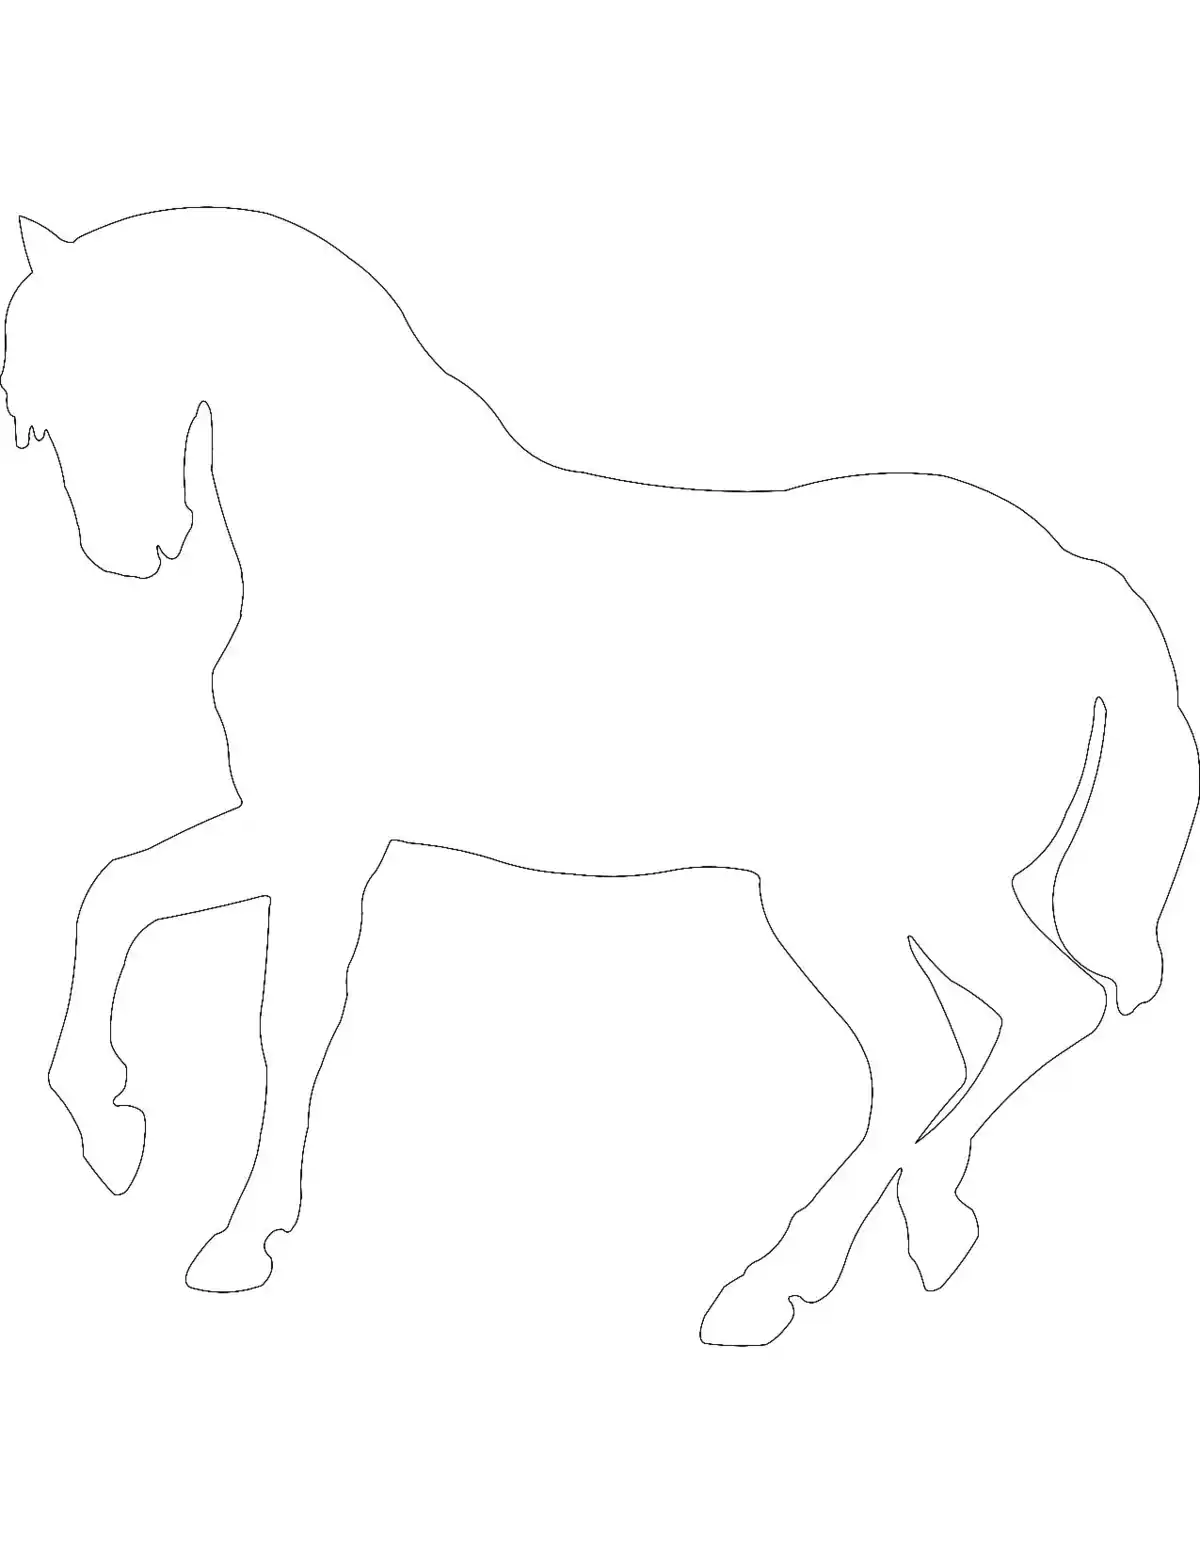 Free Download Coloring PDF, Dancing Horse Silhouette Vector Coloring Pages Pdf